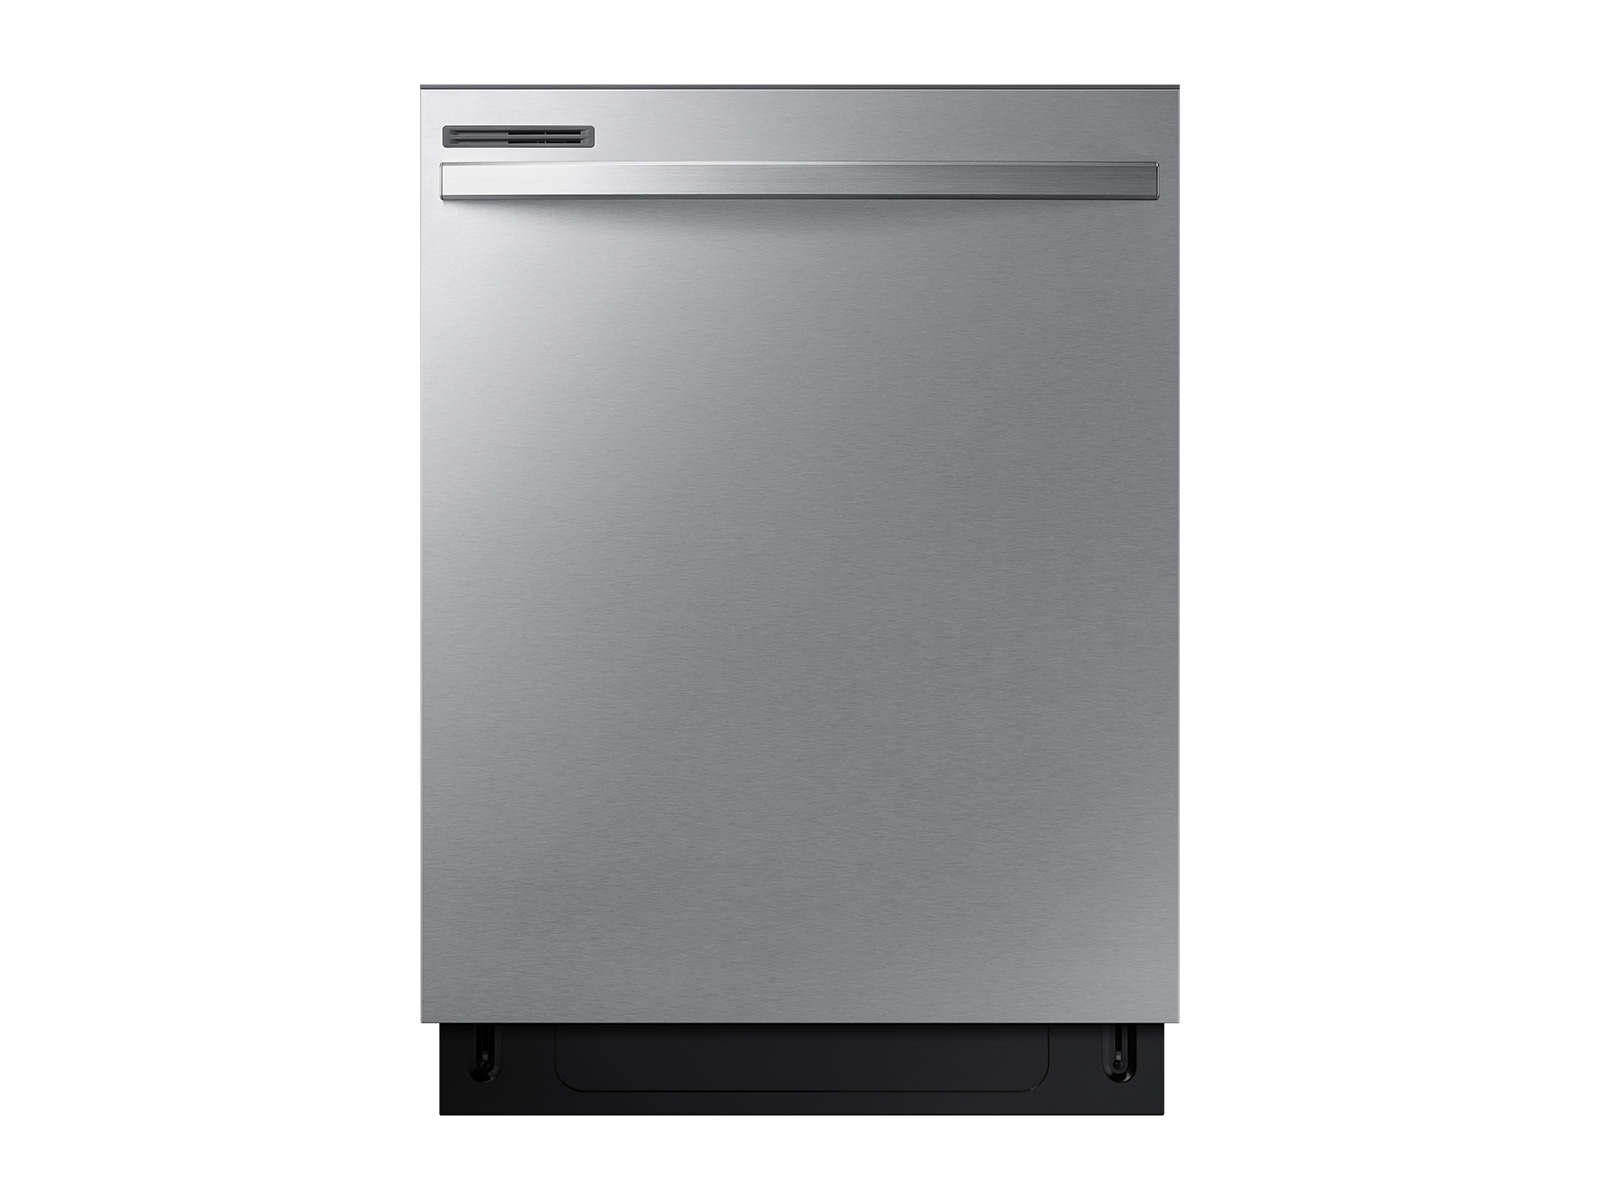 Samsung Fingerprint Resistant 53 dBA Dishwasher with Height-Adjustable Rack in Silver(DW80CG4021SRAA)